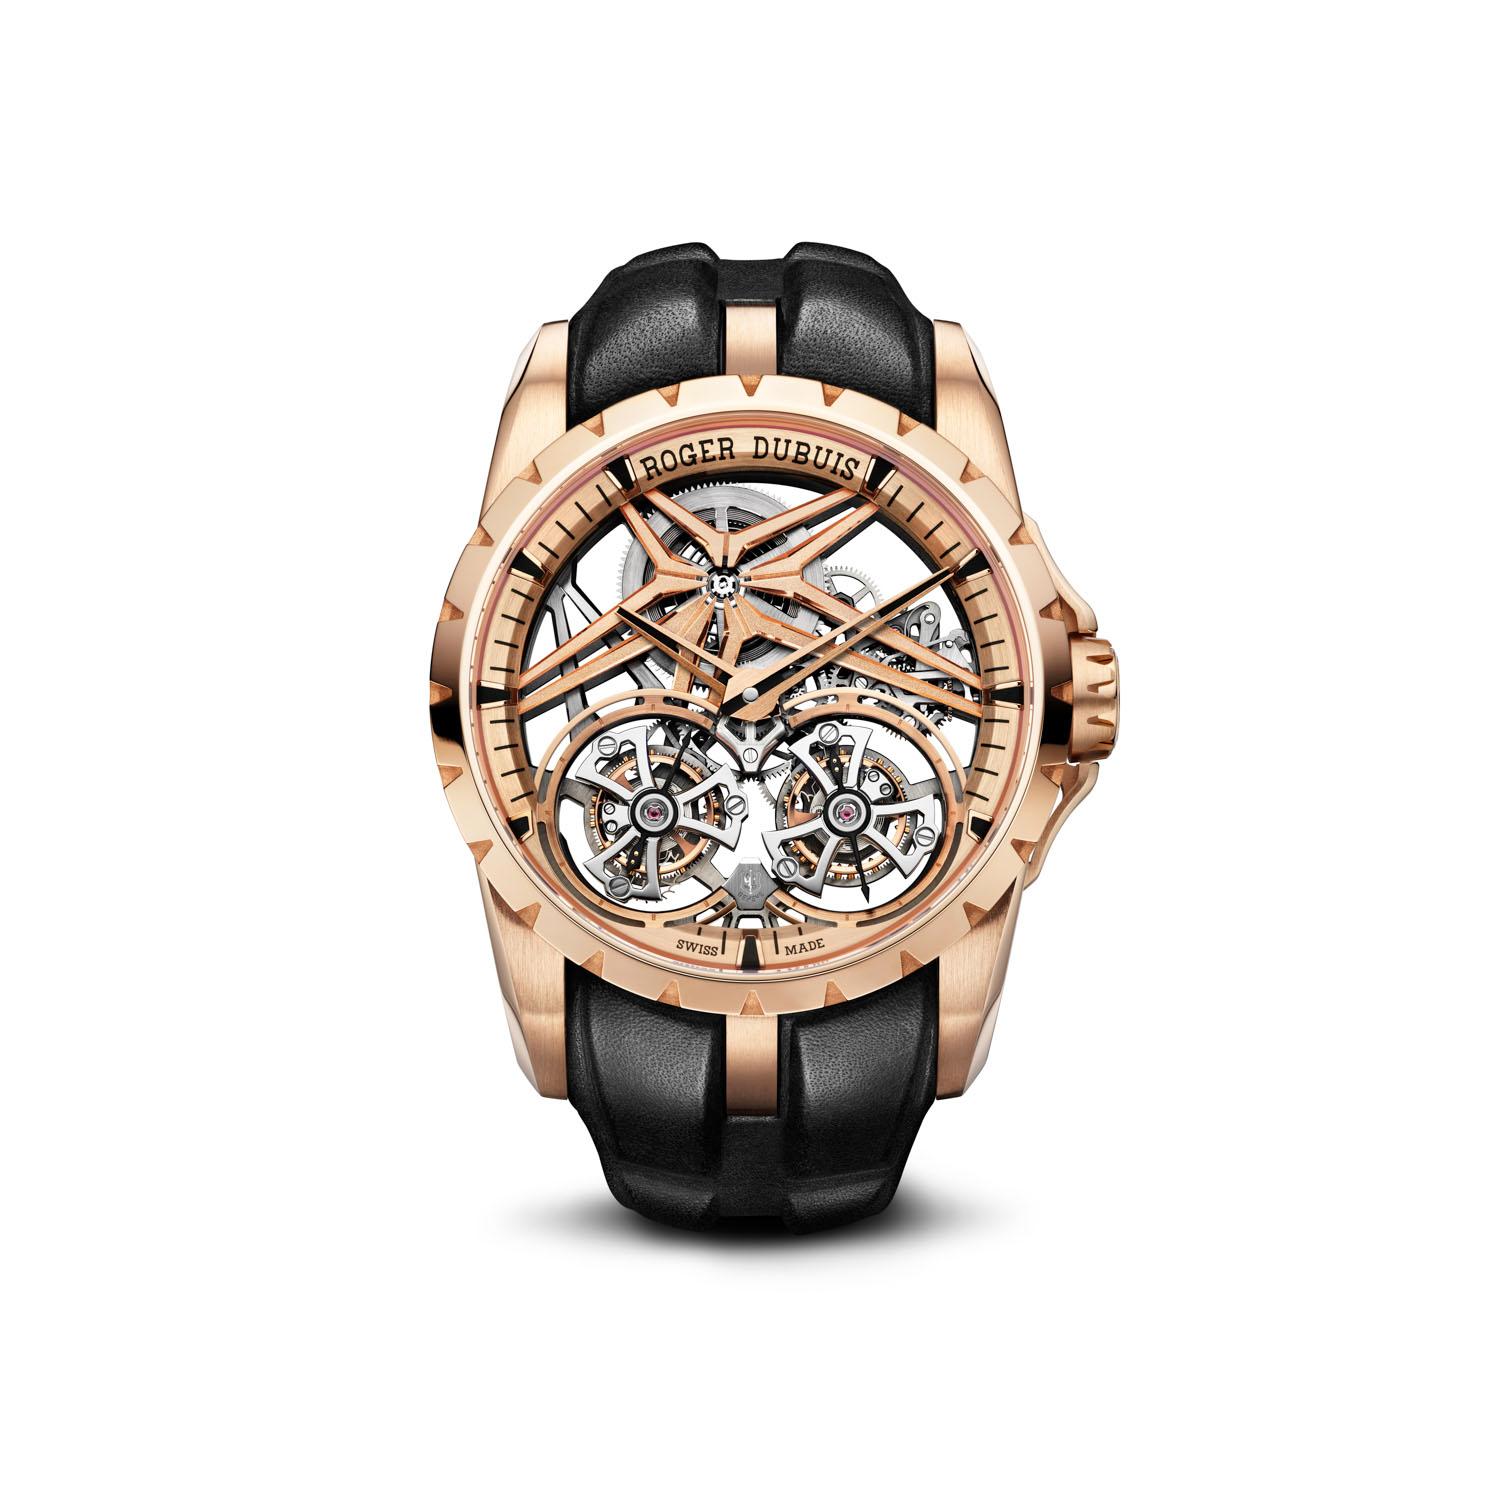 The 2021 Excalibur Double Flying Tourbillon ref. RDDBEX0920 in a 45mm pink gold case (Limited edition of 8 pieces)